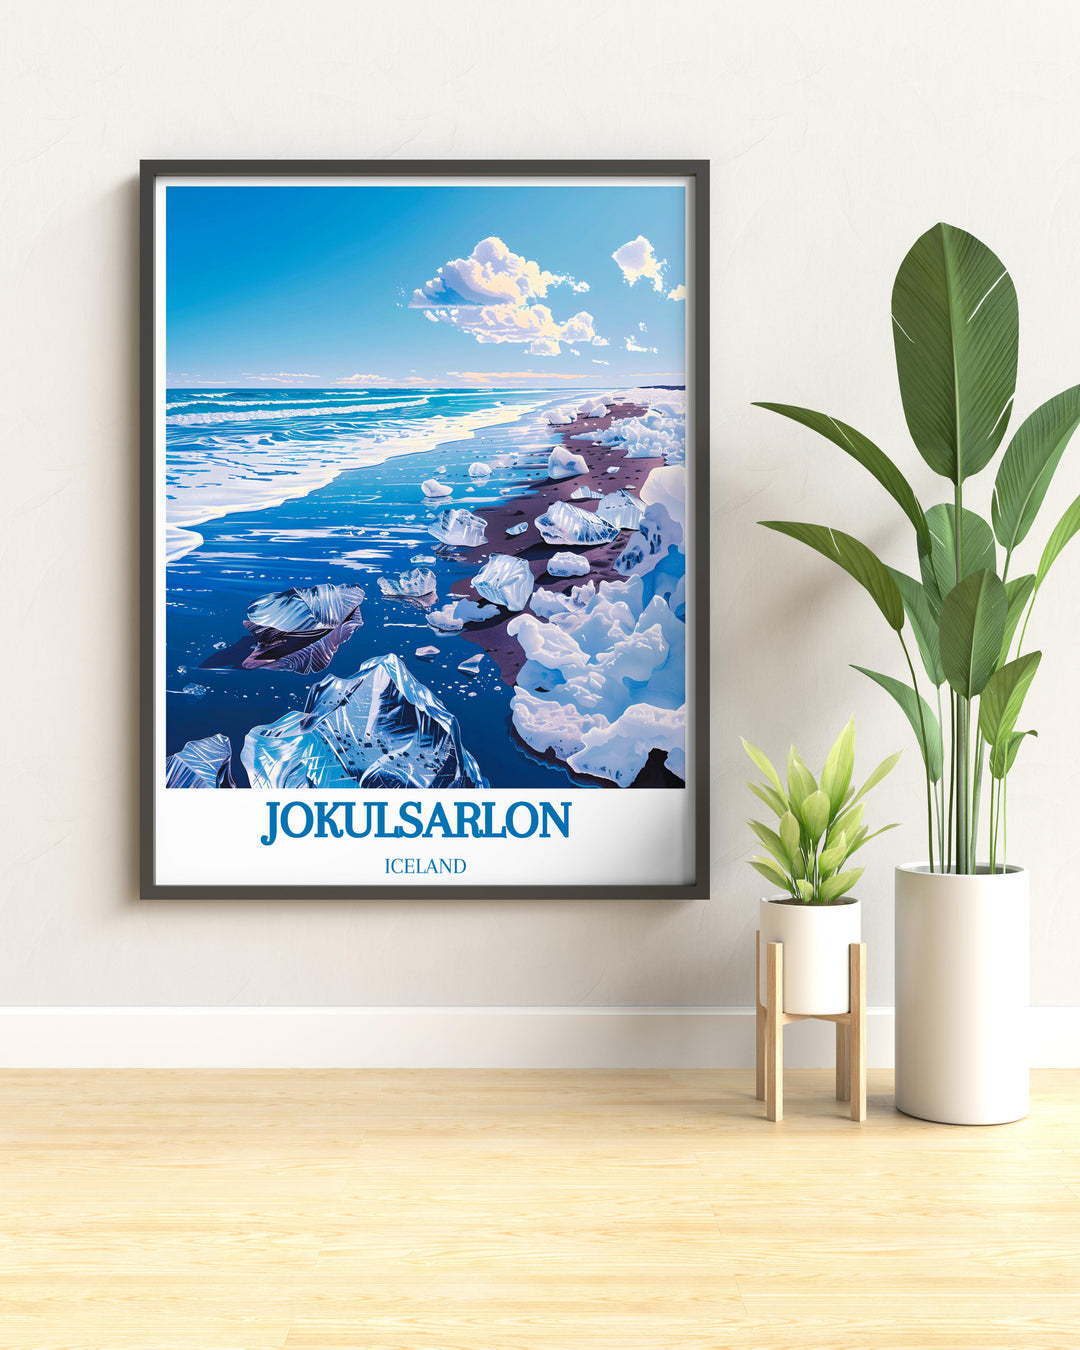 Canvas art of Iceland displaying the colorful dance of the Northern Lights in the Arctic sky perfect for enthusiasts of natural phenomena